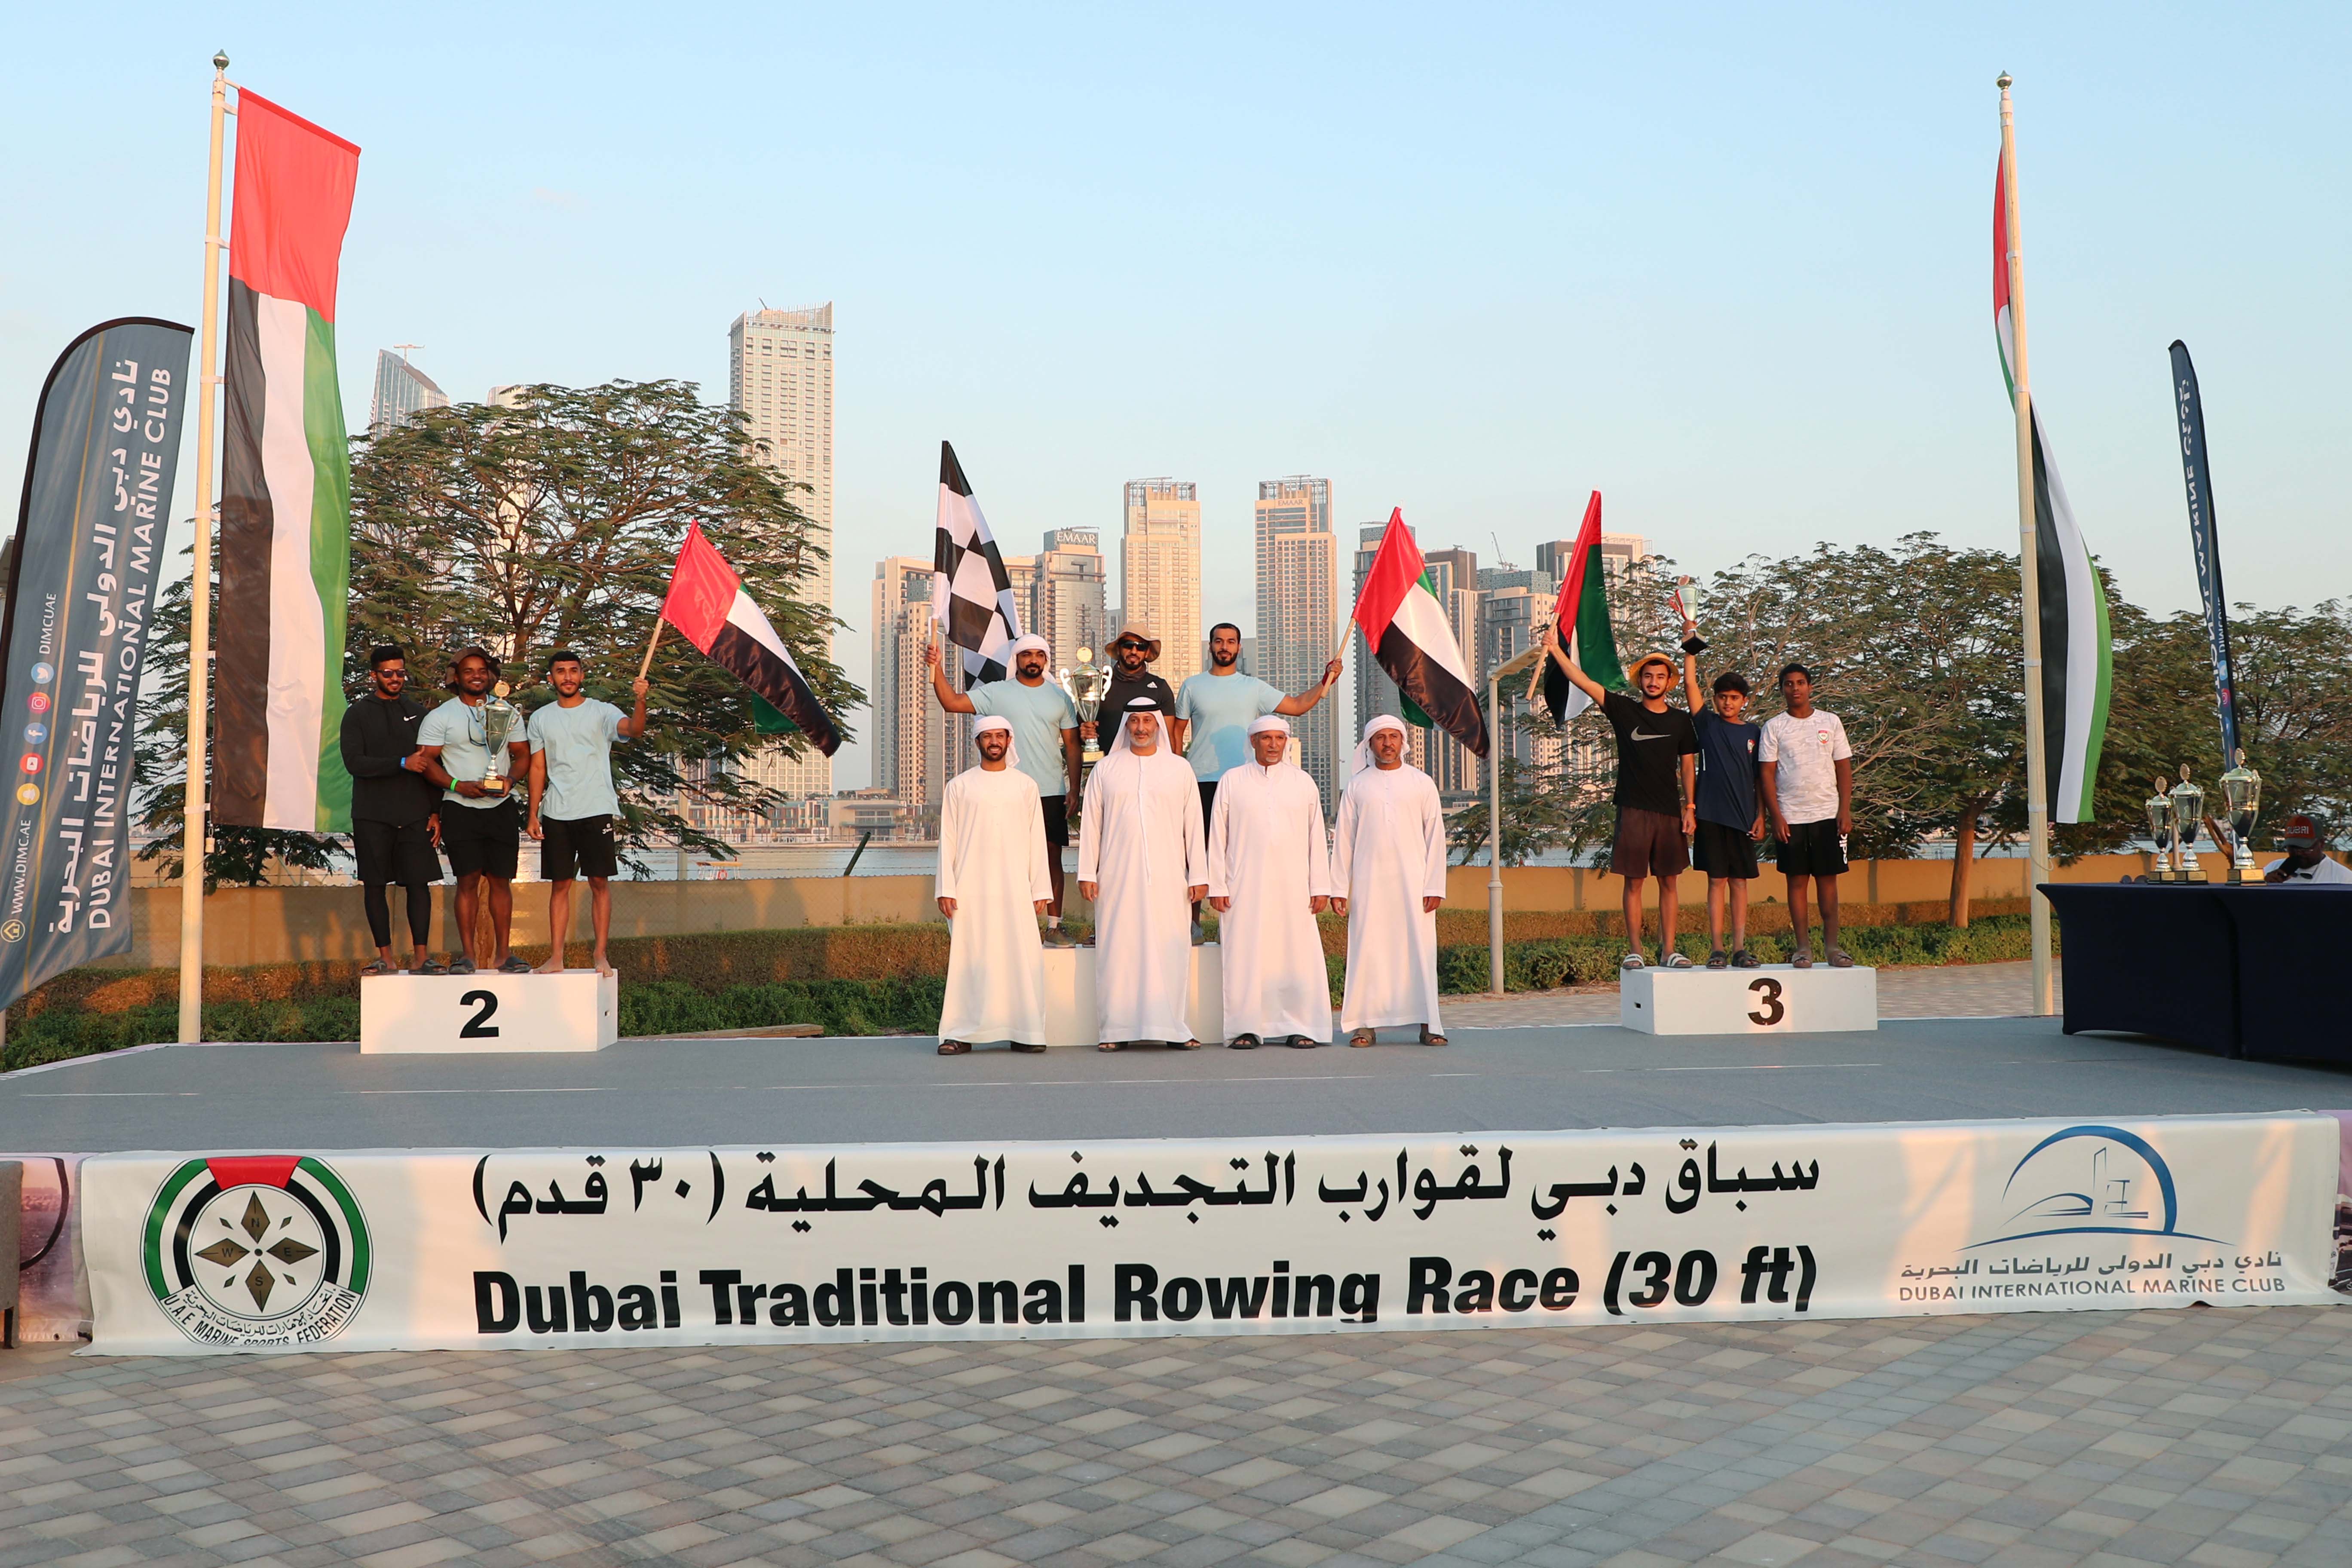 (Al Asifa 36 ) Continues its Brilliance in the Second Round of Rowing Race